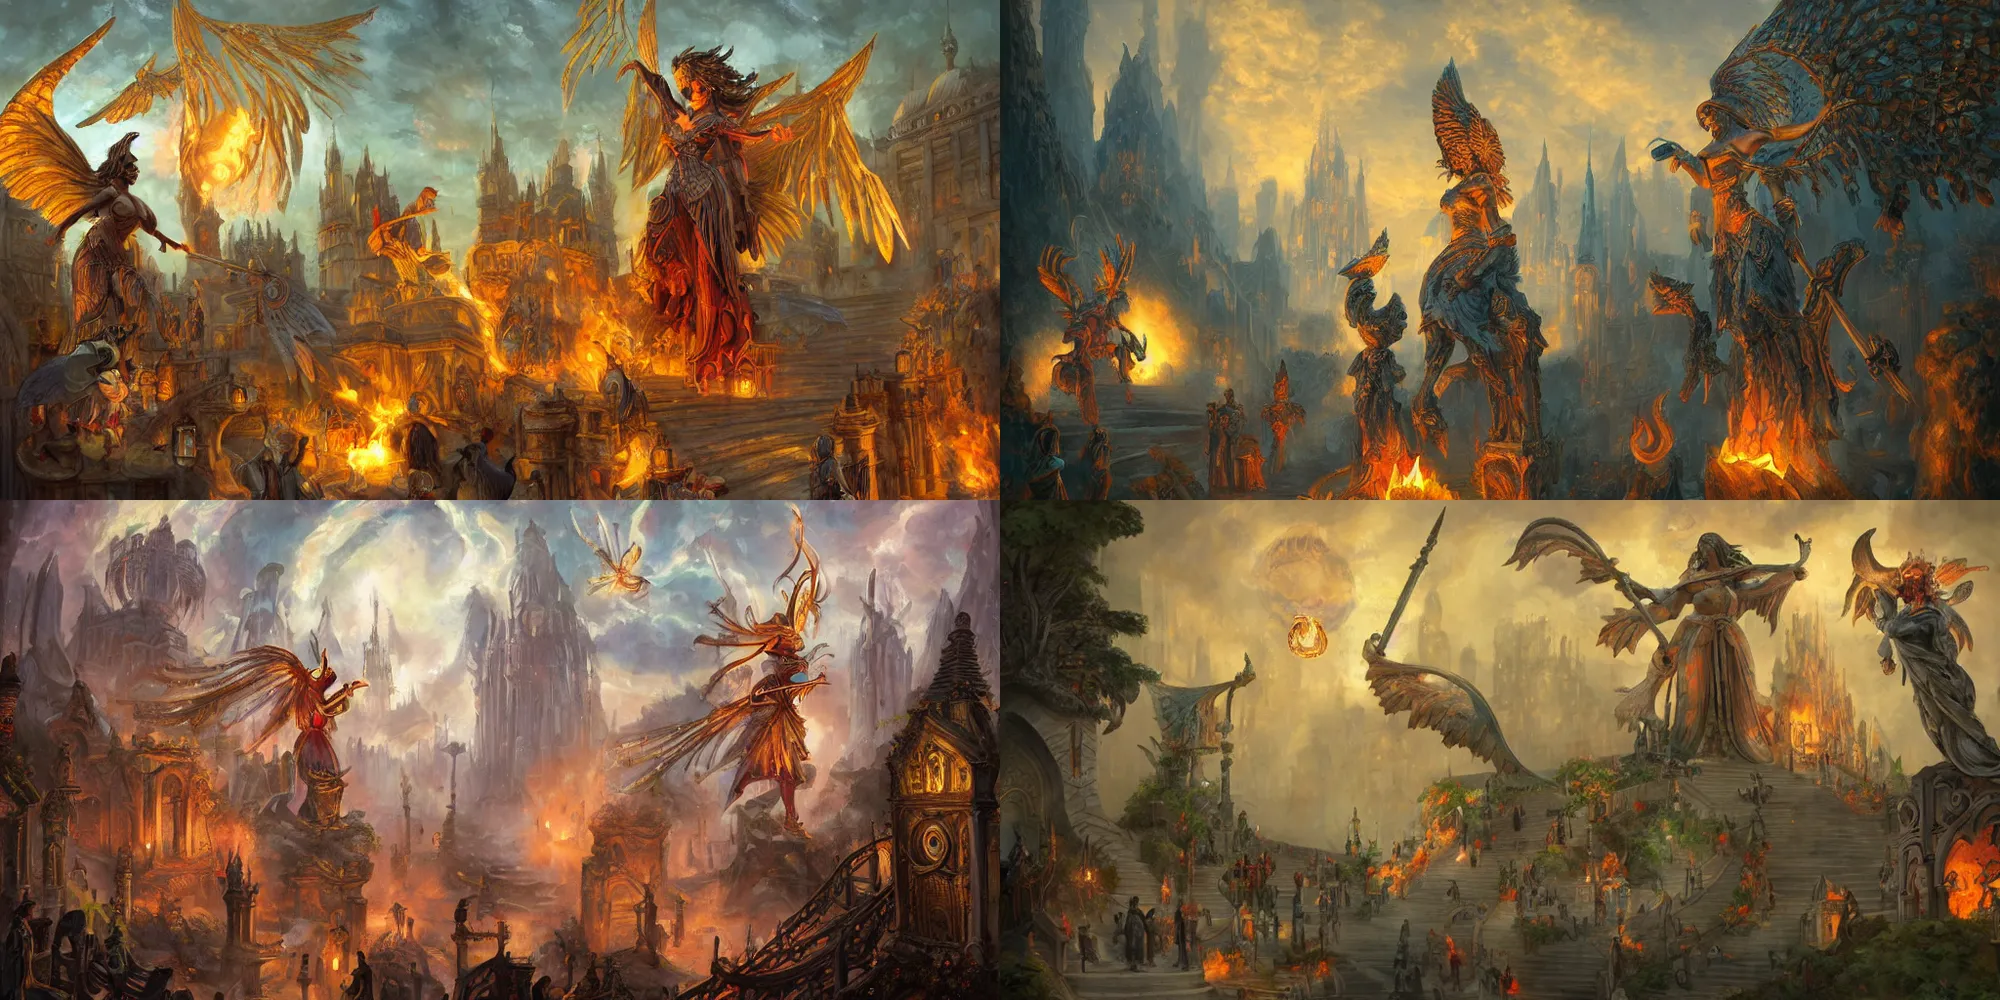 Prompt: Painting of a fantasy city, two large stairs leads to a large woman statue with wings, this statue has wings on its back, the fire lights on its spear, in the foreground is a poor human, in the background are several people and gnomes walking on the streets